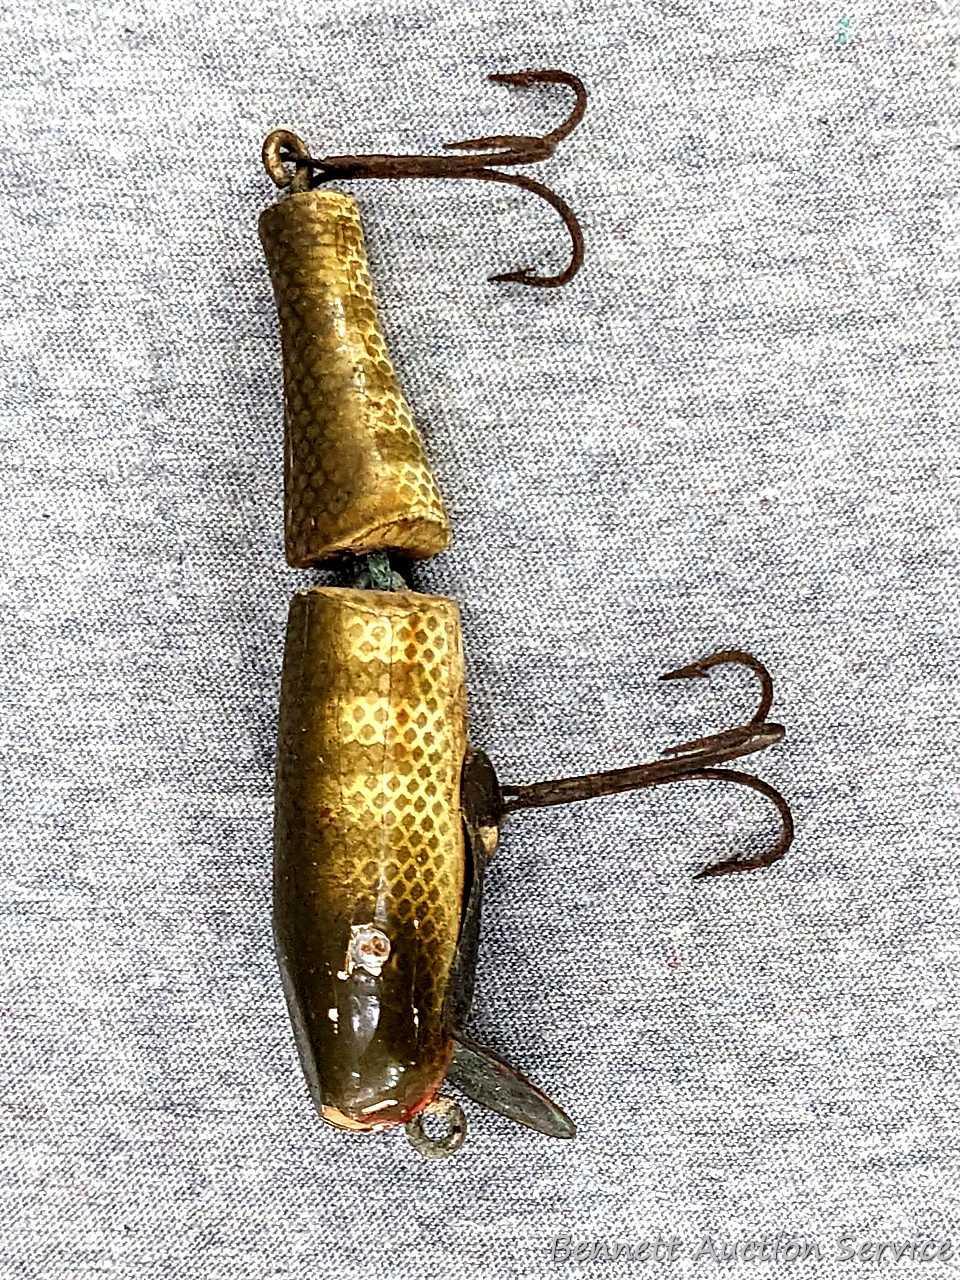 Vintage Paw-Paw jointed wooden lure is about 4